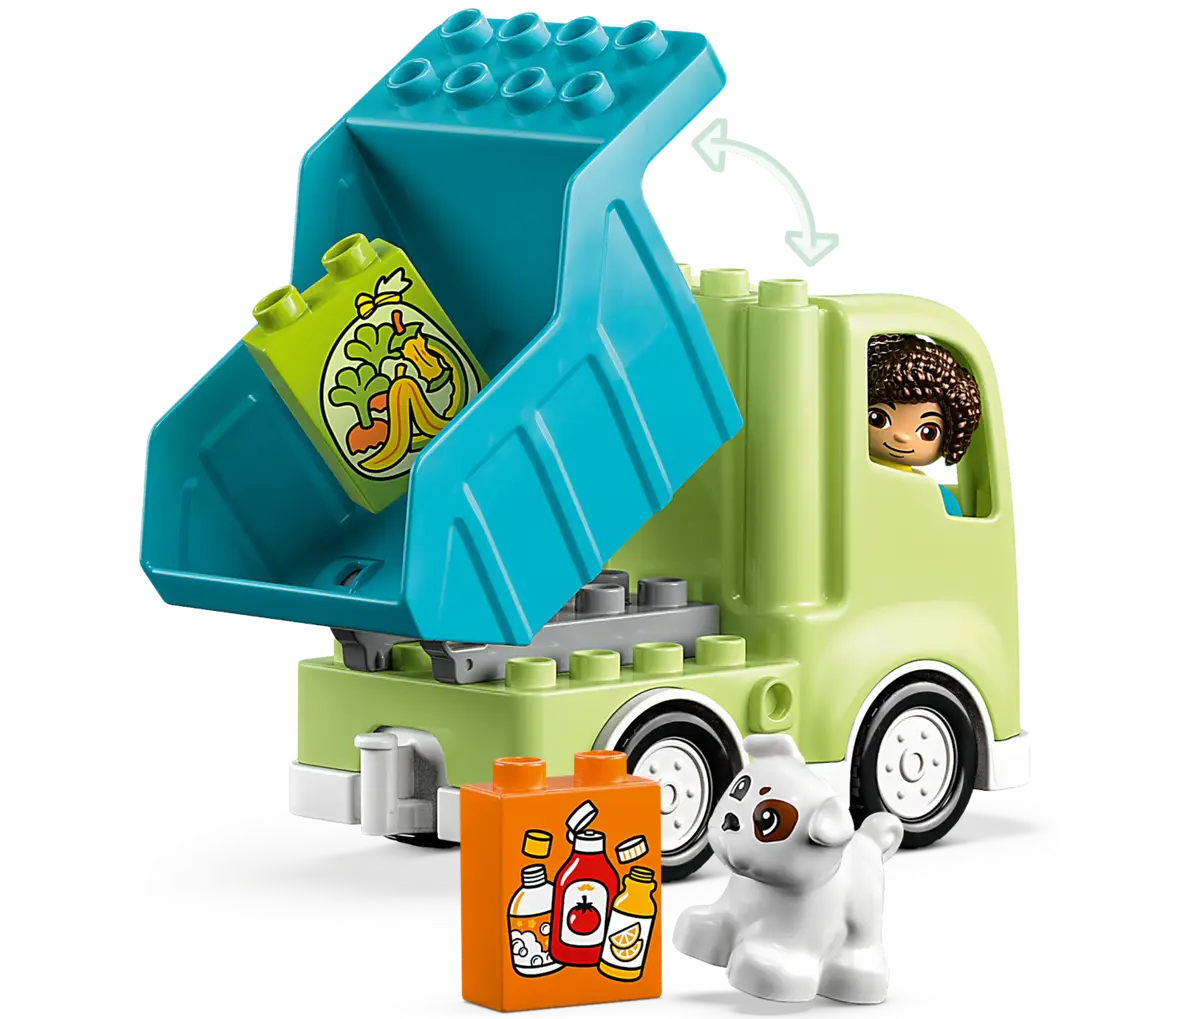 DUPLO 10987: Recycling Truck